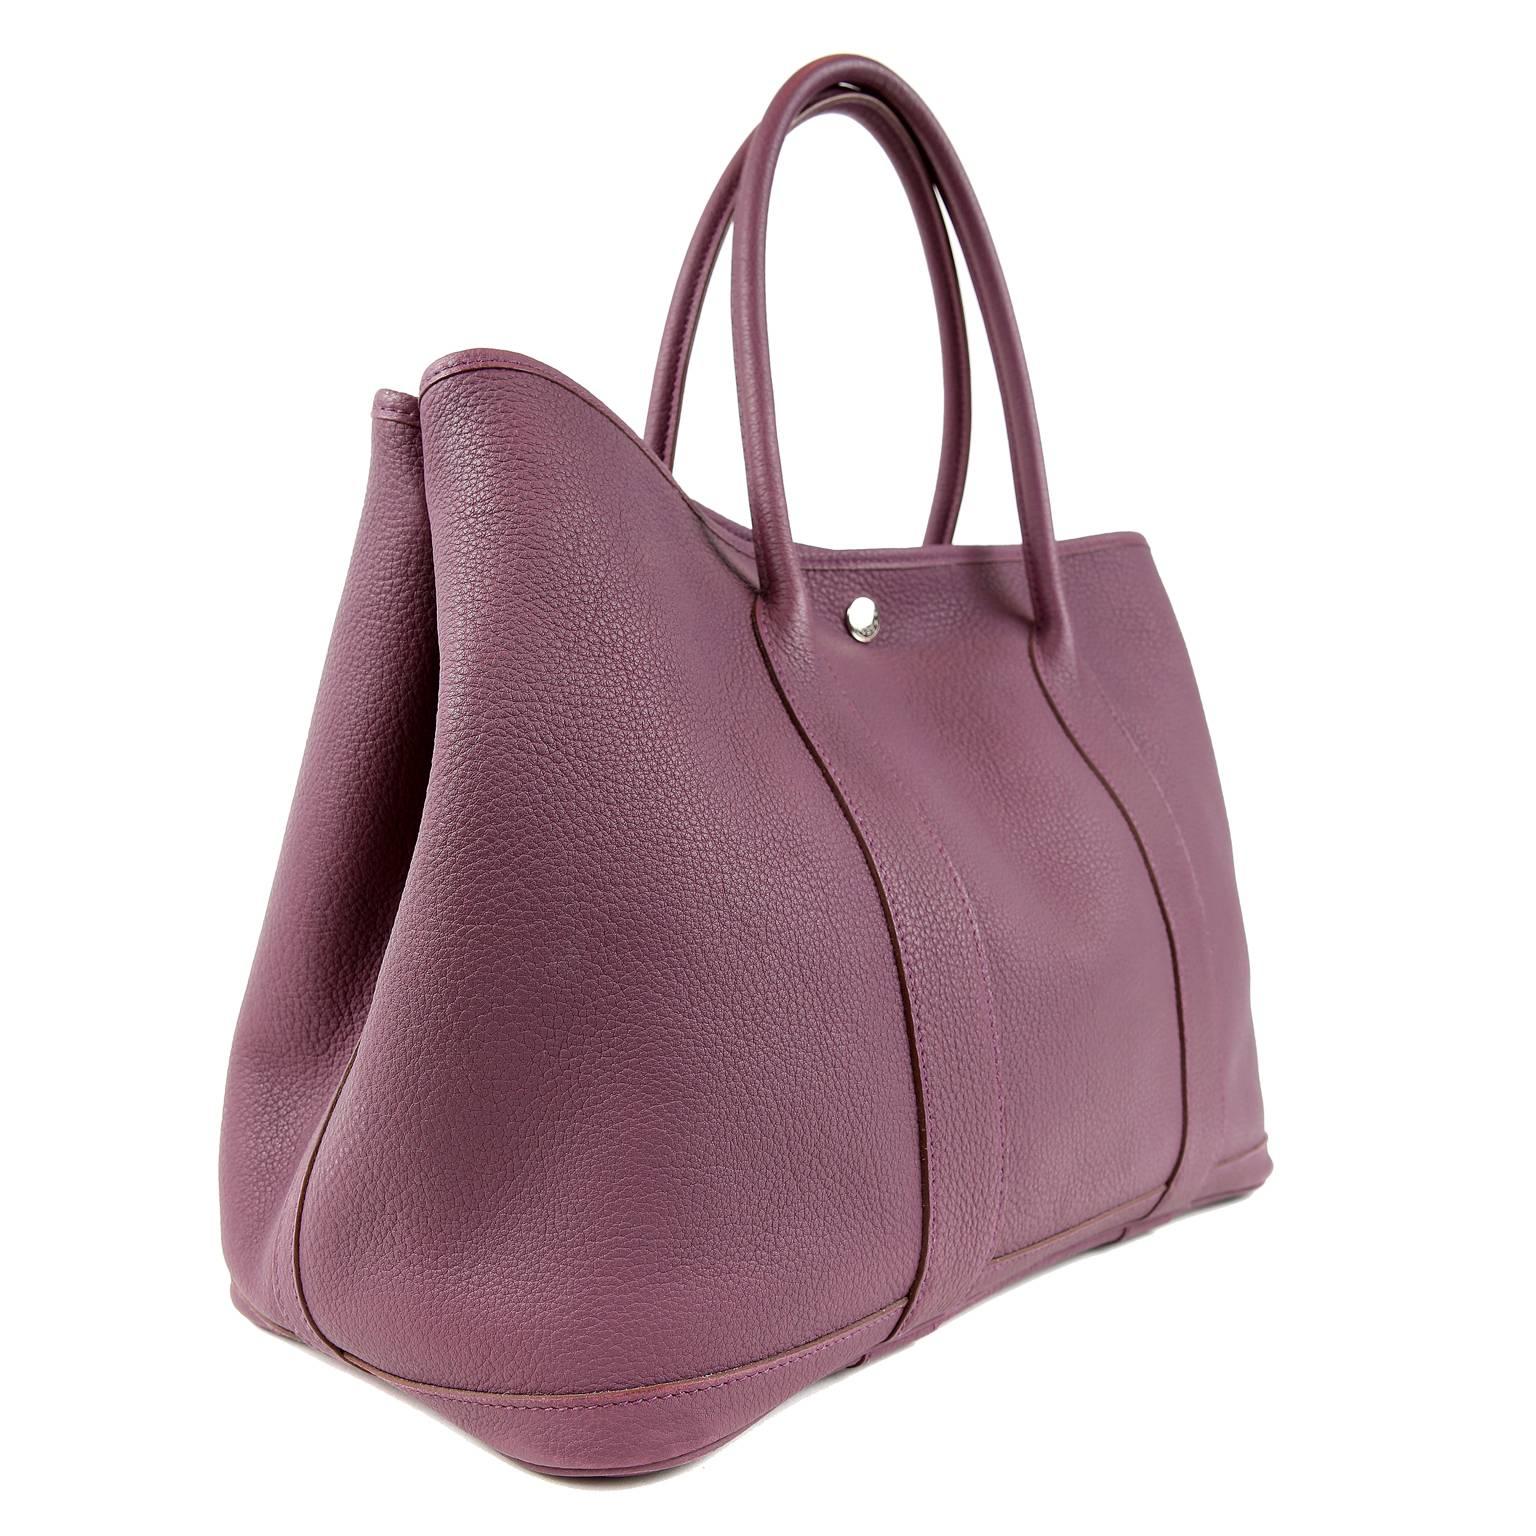 Hermès Violet All Leather Garden Party Tote- Nearly Pristine
  With an adjustable silhouette and understated panache, the Garden Party is a favorite among Hermès lovers. 

Pretty Violet Togo leather with Palladium hardware clou de selle snaps.  Side